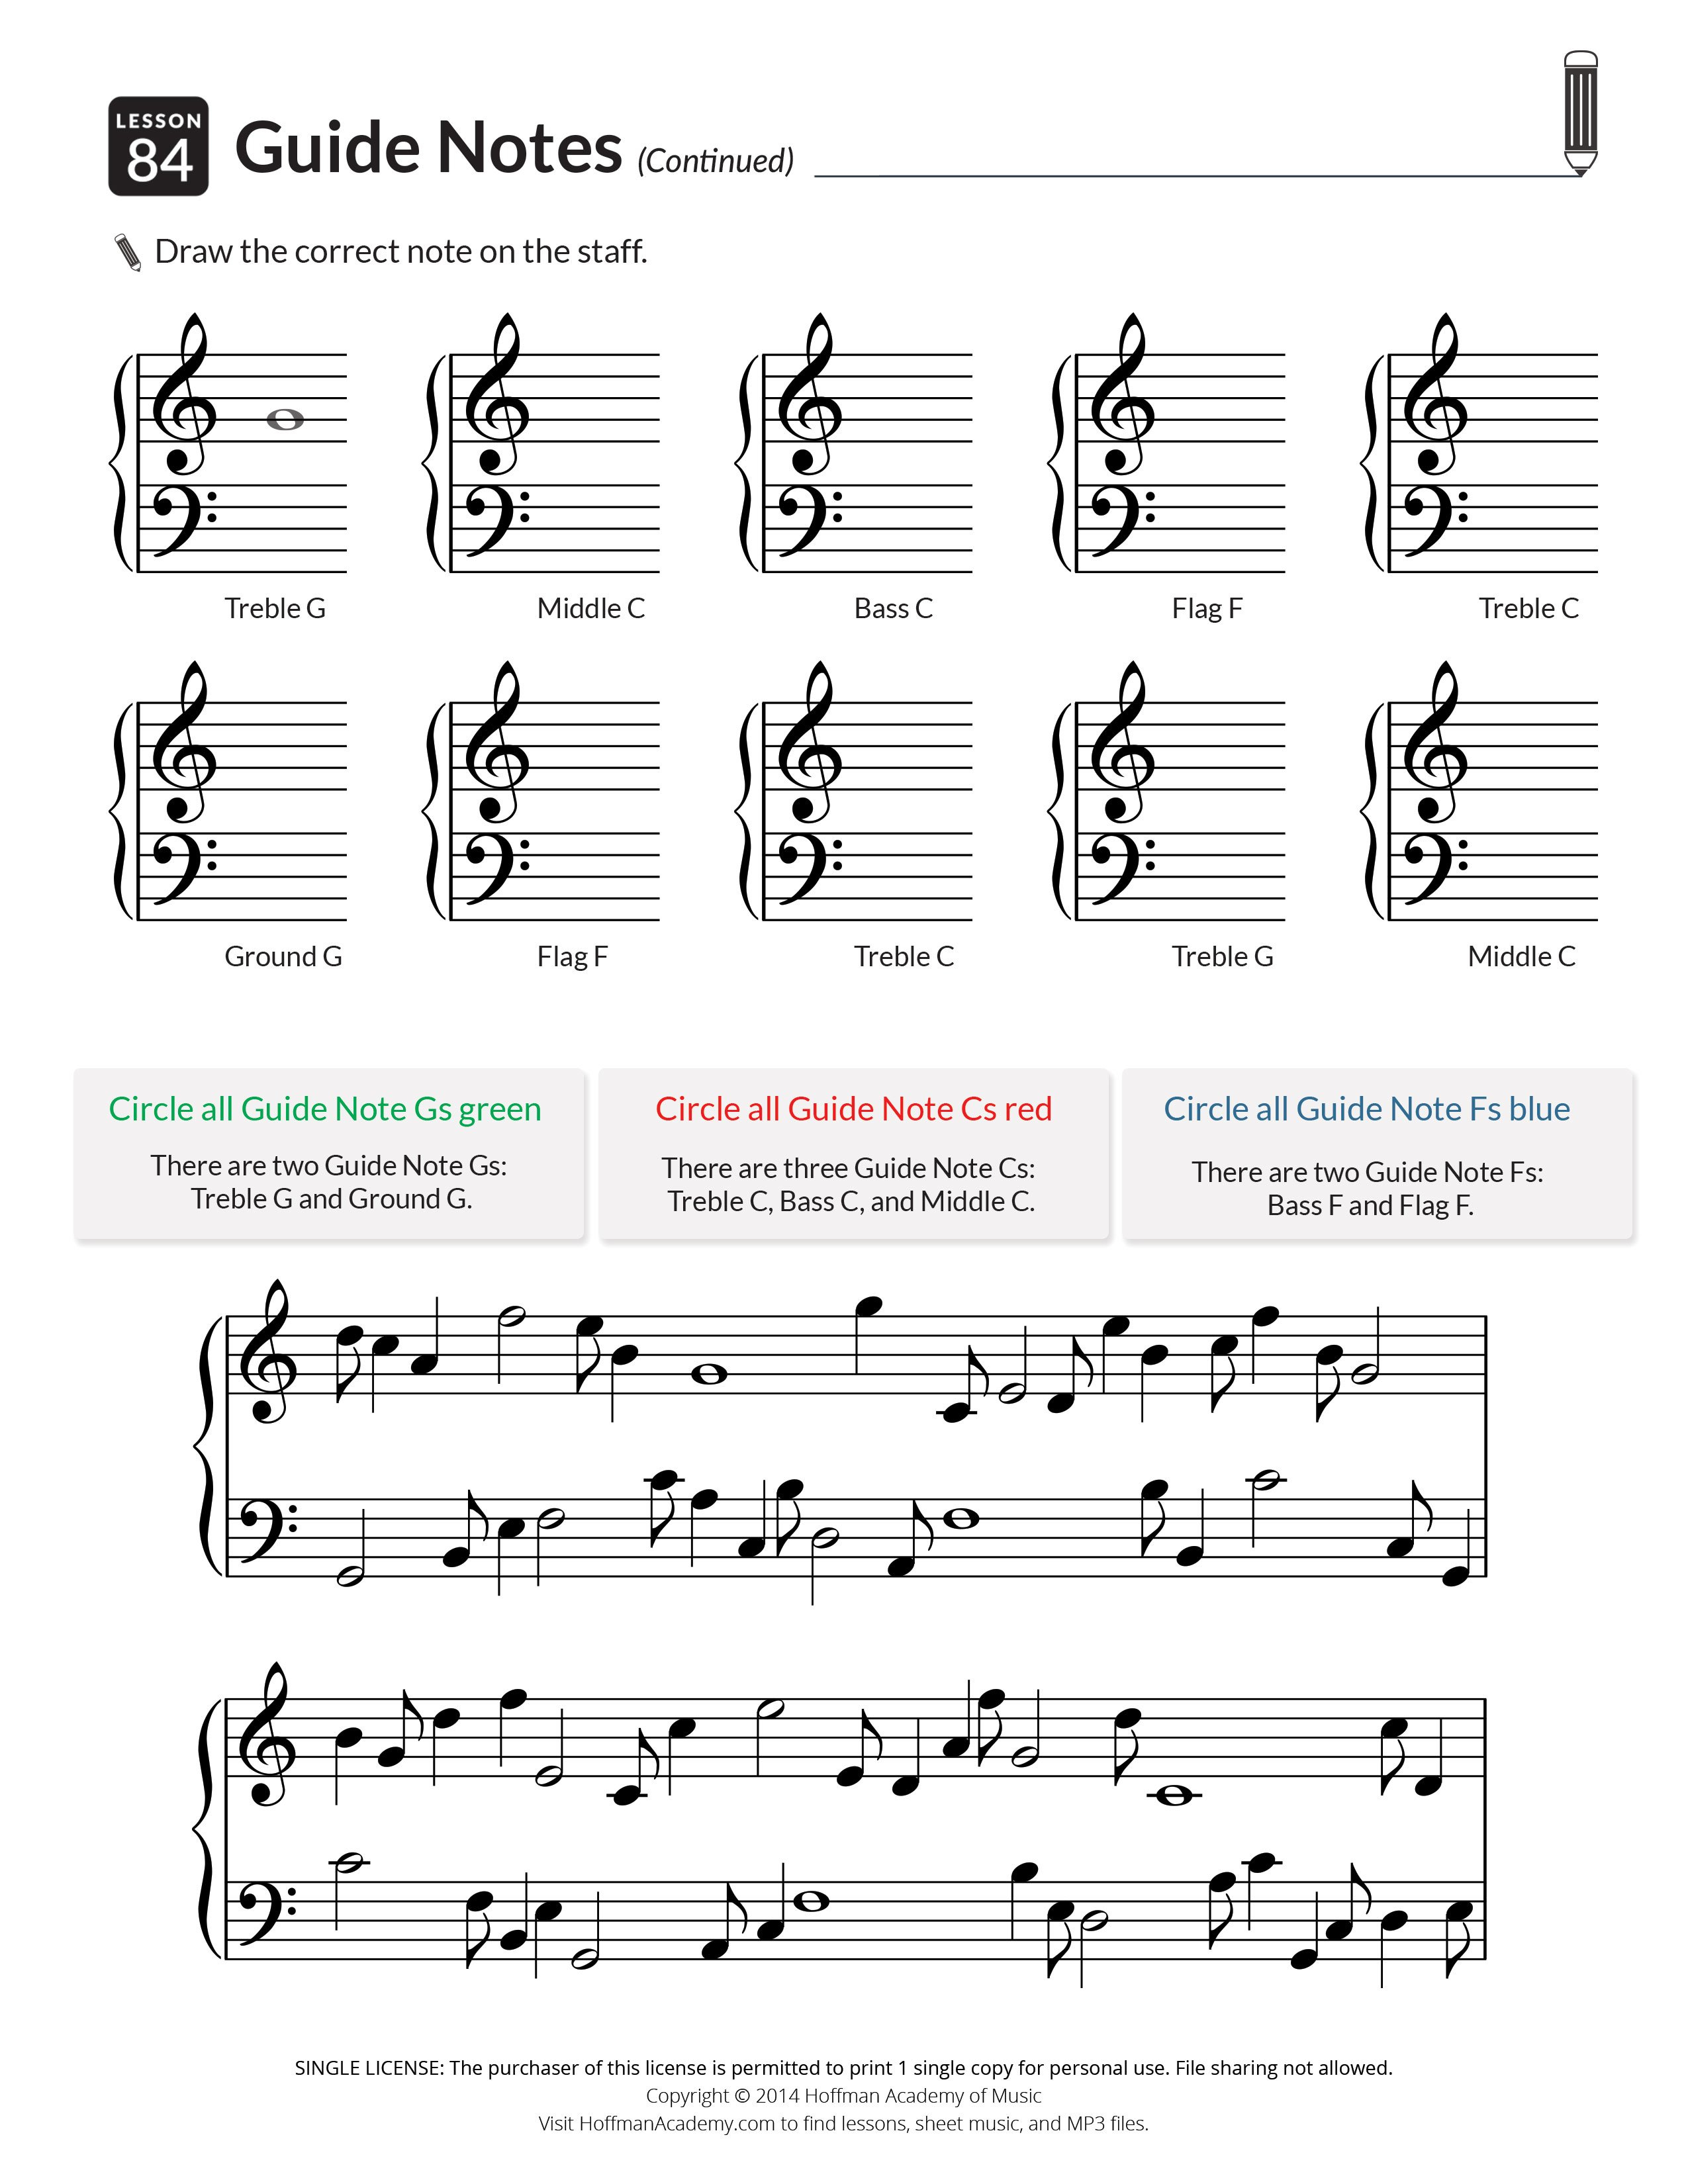 Printables  Audio For Piano Units 15 Lessons 1100  Hoffman Academy As Well As Rhythmic Dictation Worksheet